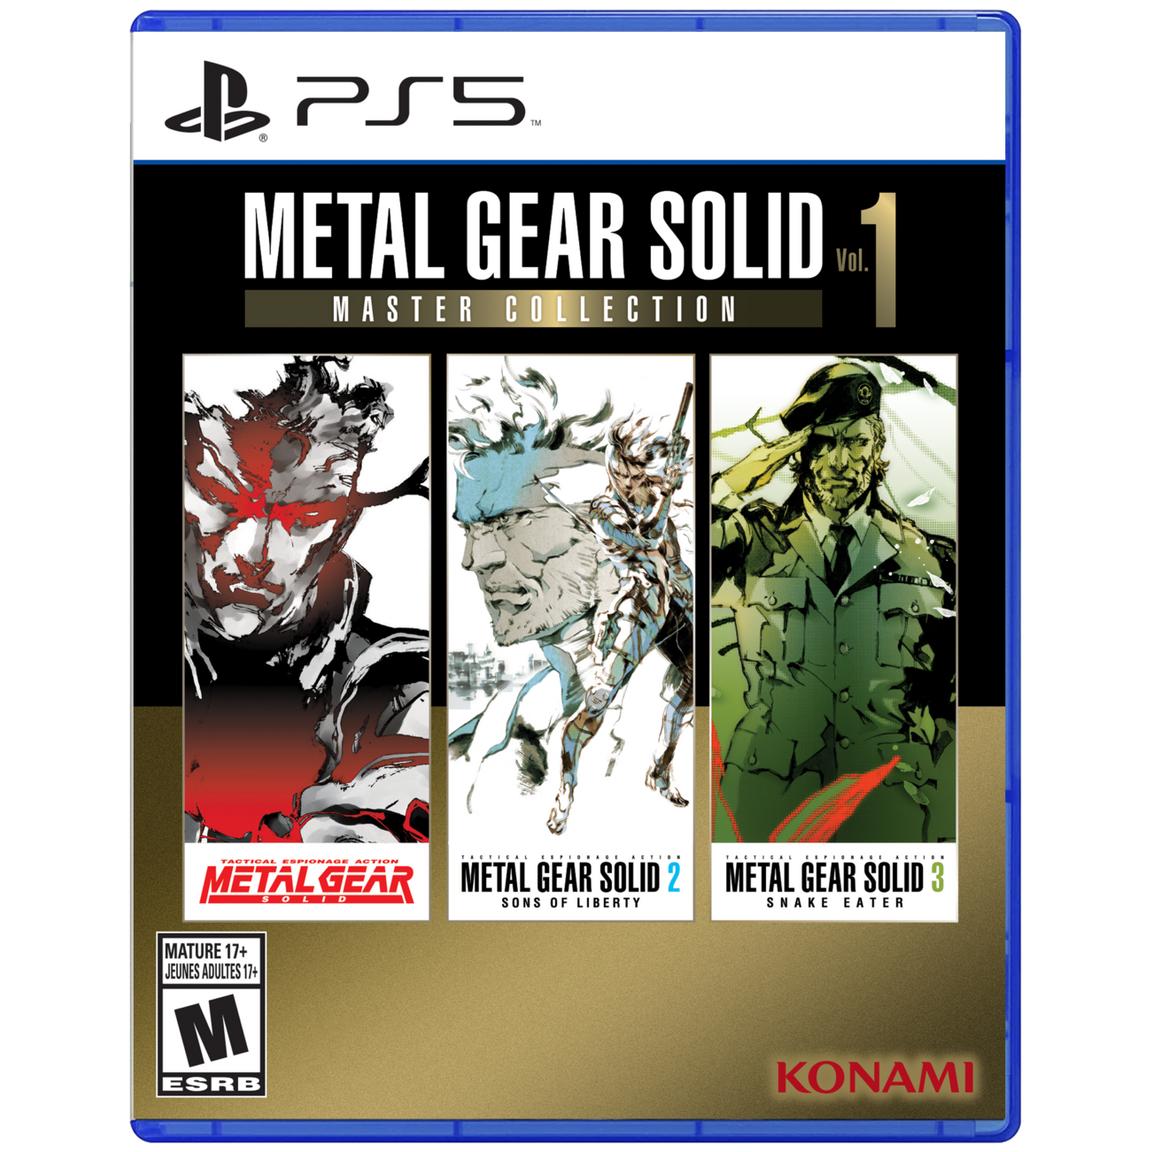 Metal Gear Solid: Master Collection Vol.1 - PlayStation 5, Pre-Owned